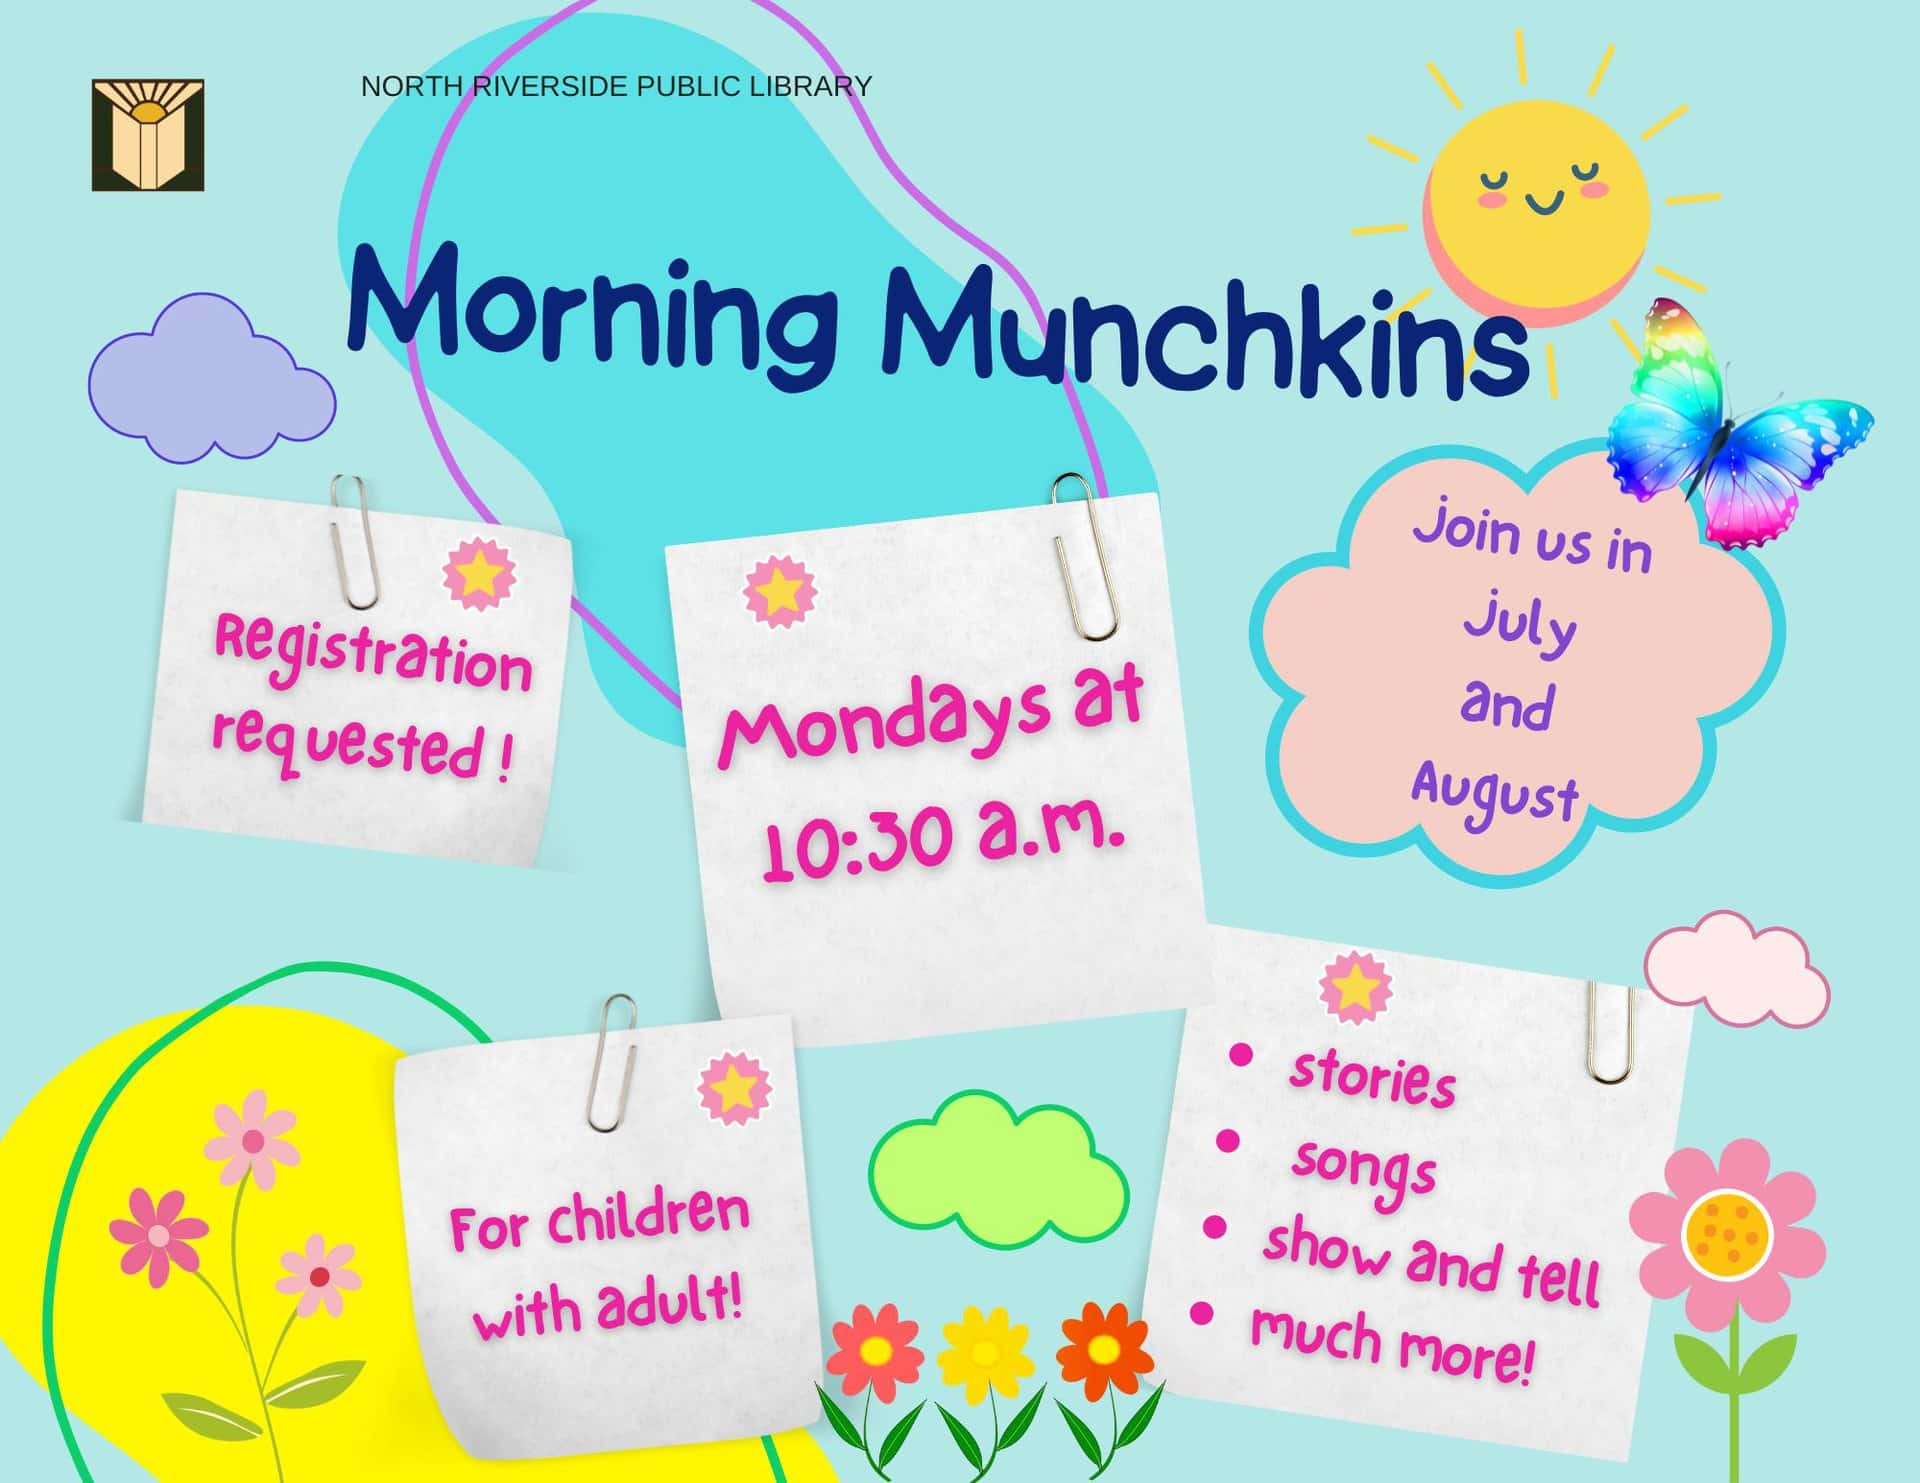 Morning Munchkins  Every Monday 10:30 – 11 am  Starting July 1st through August 26th    Stories, songs, and fun play time, too!  Children age 5 and under with an adult.  